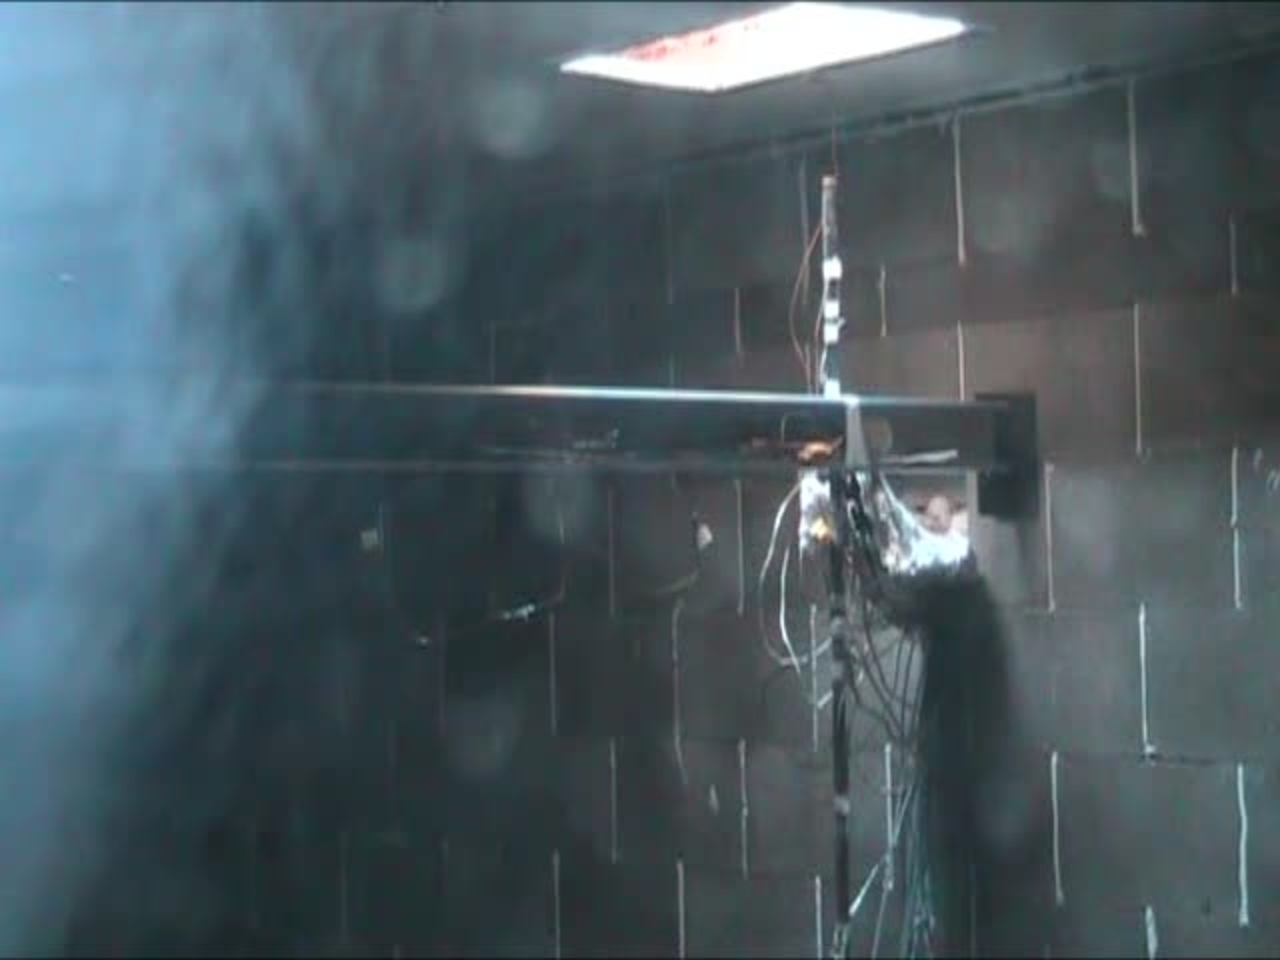 Test 6: Dispersion and Burning Behavior of Hydrogen Released in a Full-Scale Residential Garage in the Presence and Absence of Conventional Automobiles (View near ignition location and garage ceiling)